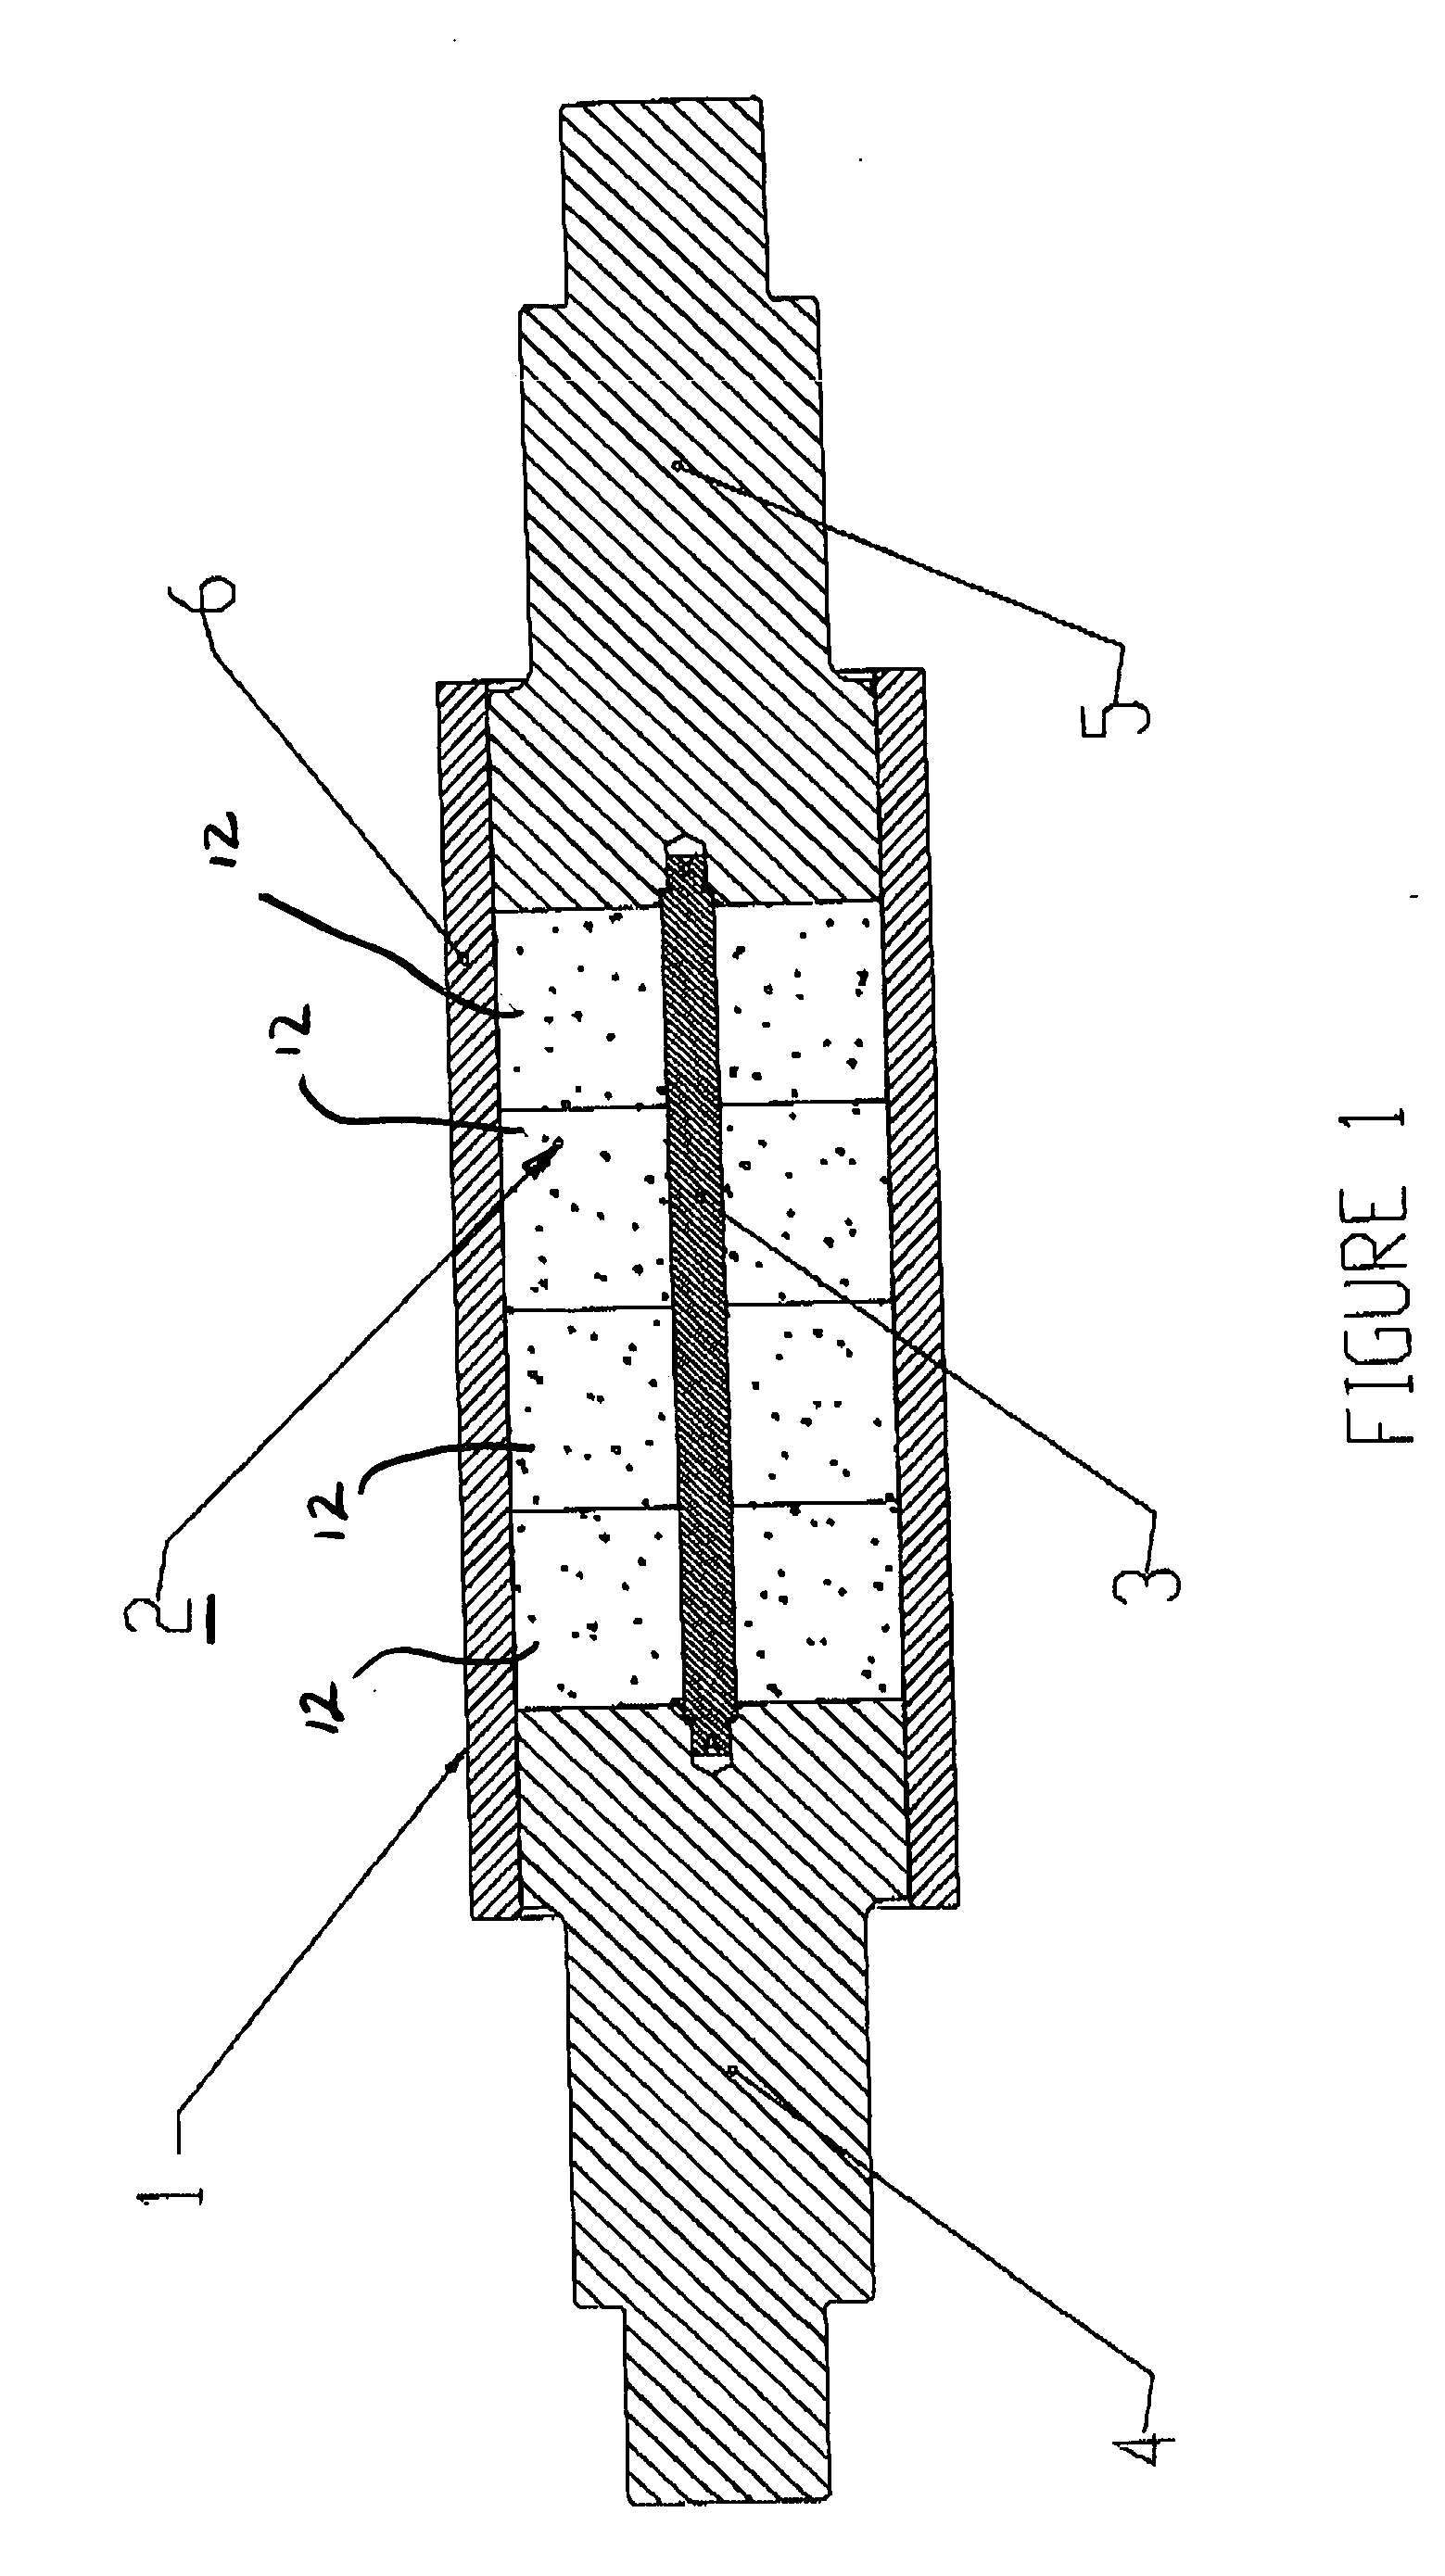 Permanent magnet rotor construction wherein relative movement between components is prevented